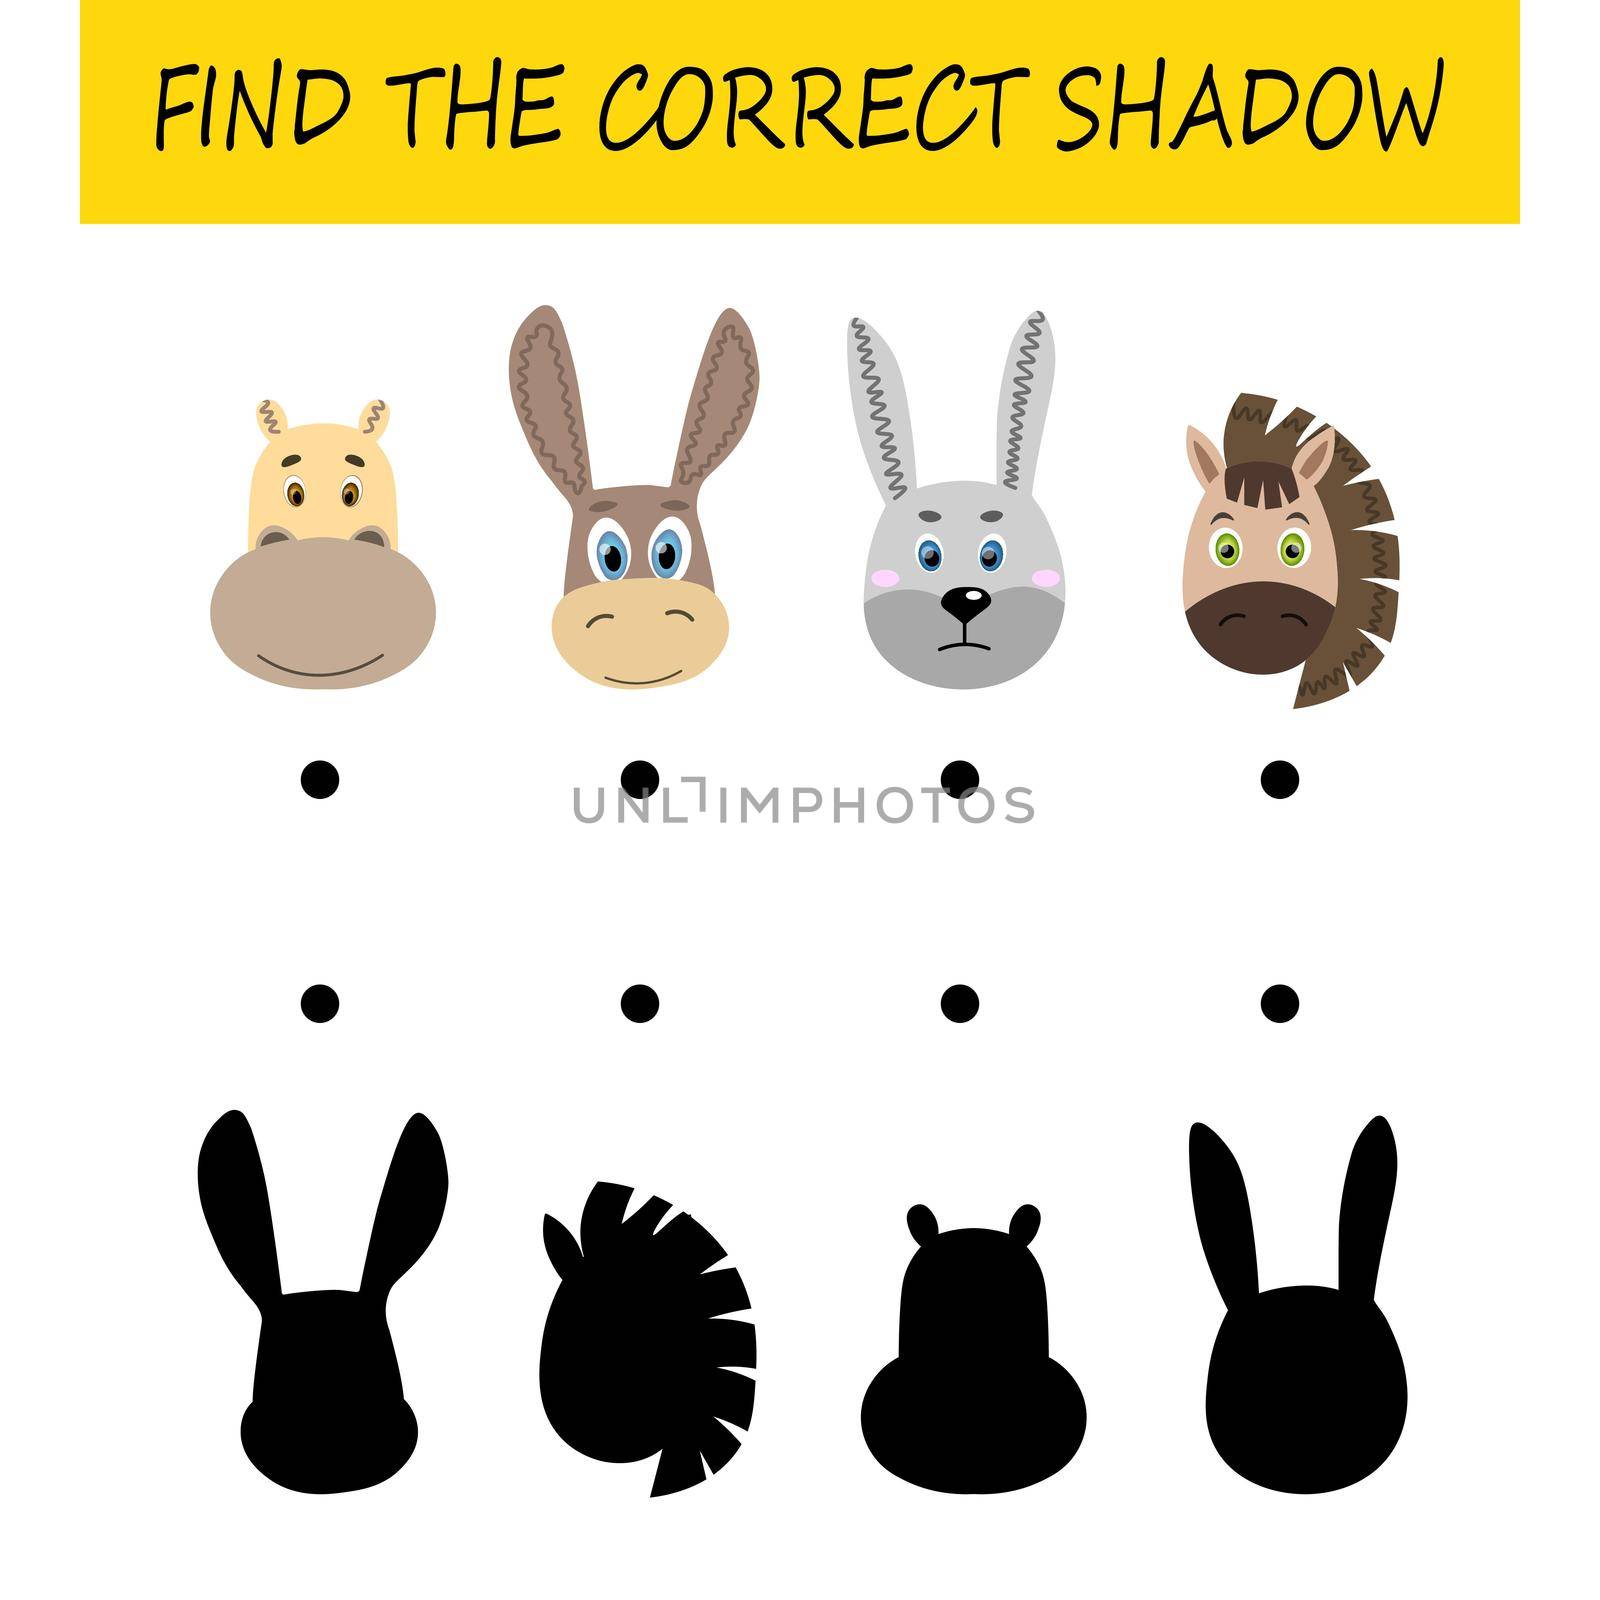 Find the correct shadow. Educational card for children. Cute animals. Logic game for kids. Home education. Colorful cartoon vector illustration.